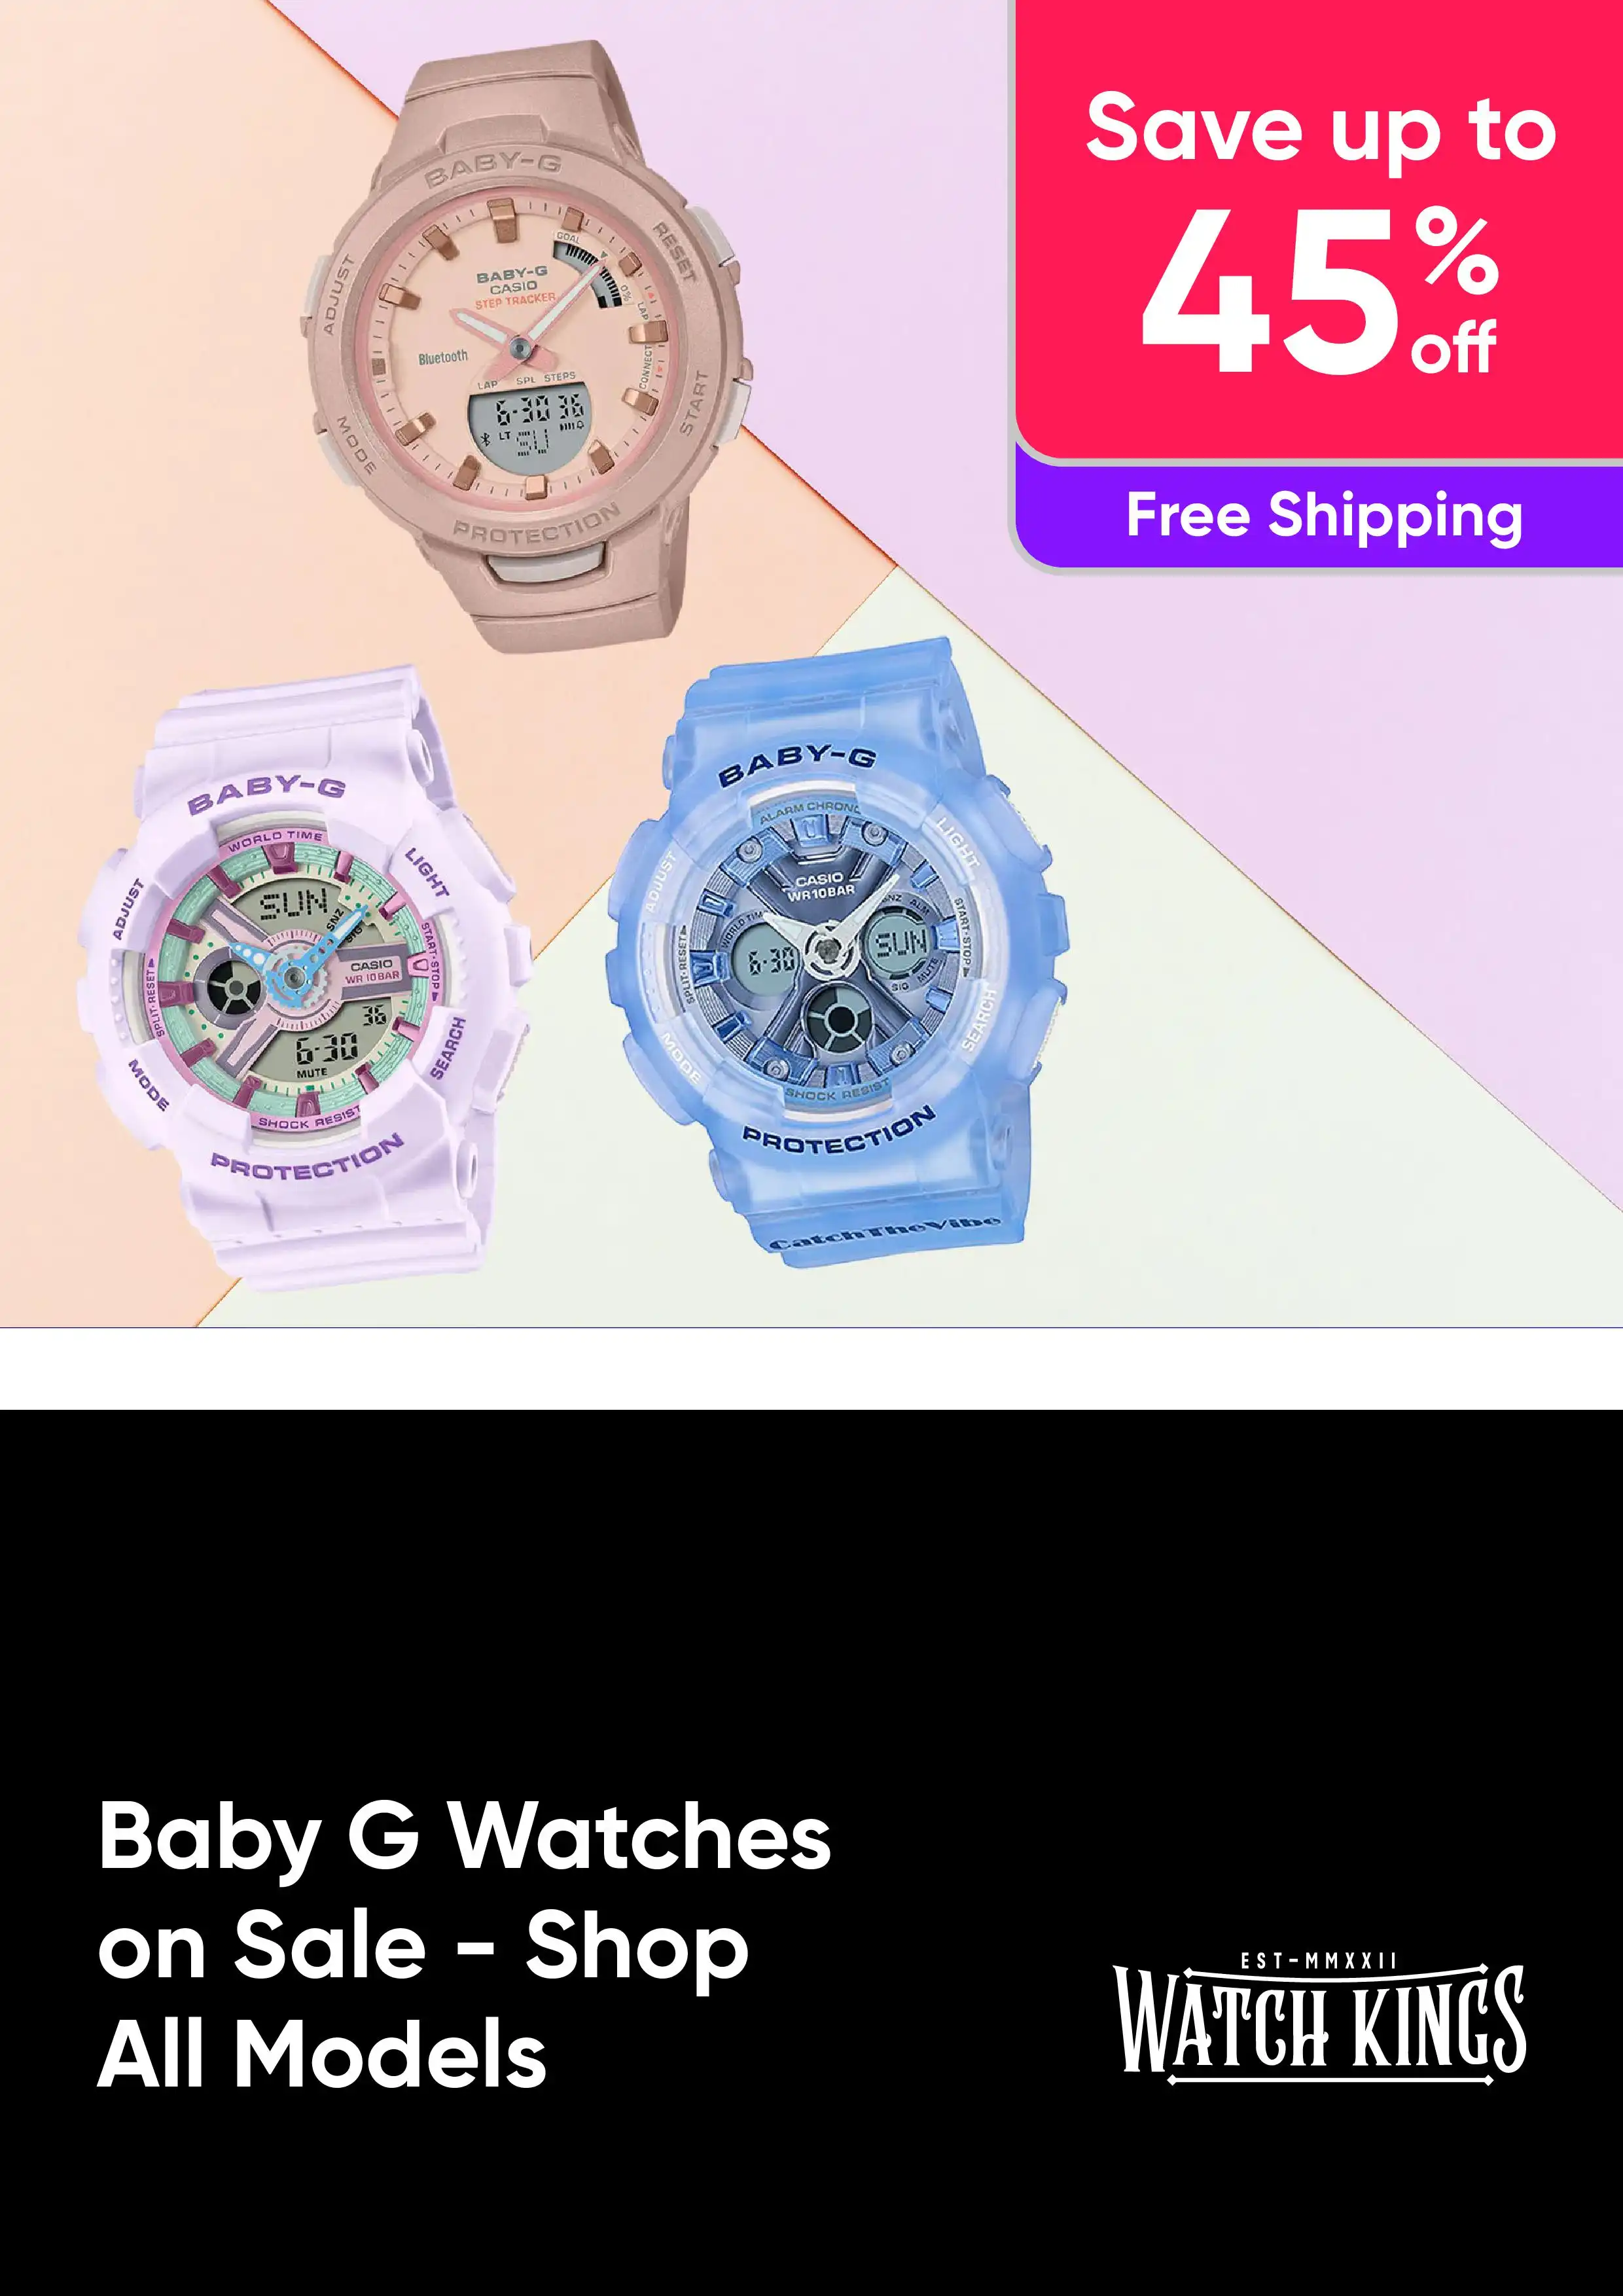 Baby G Watches on Sale - Shop All Models - Up to 45% Off RRP